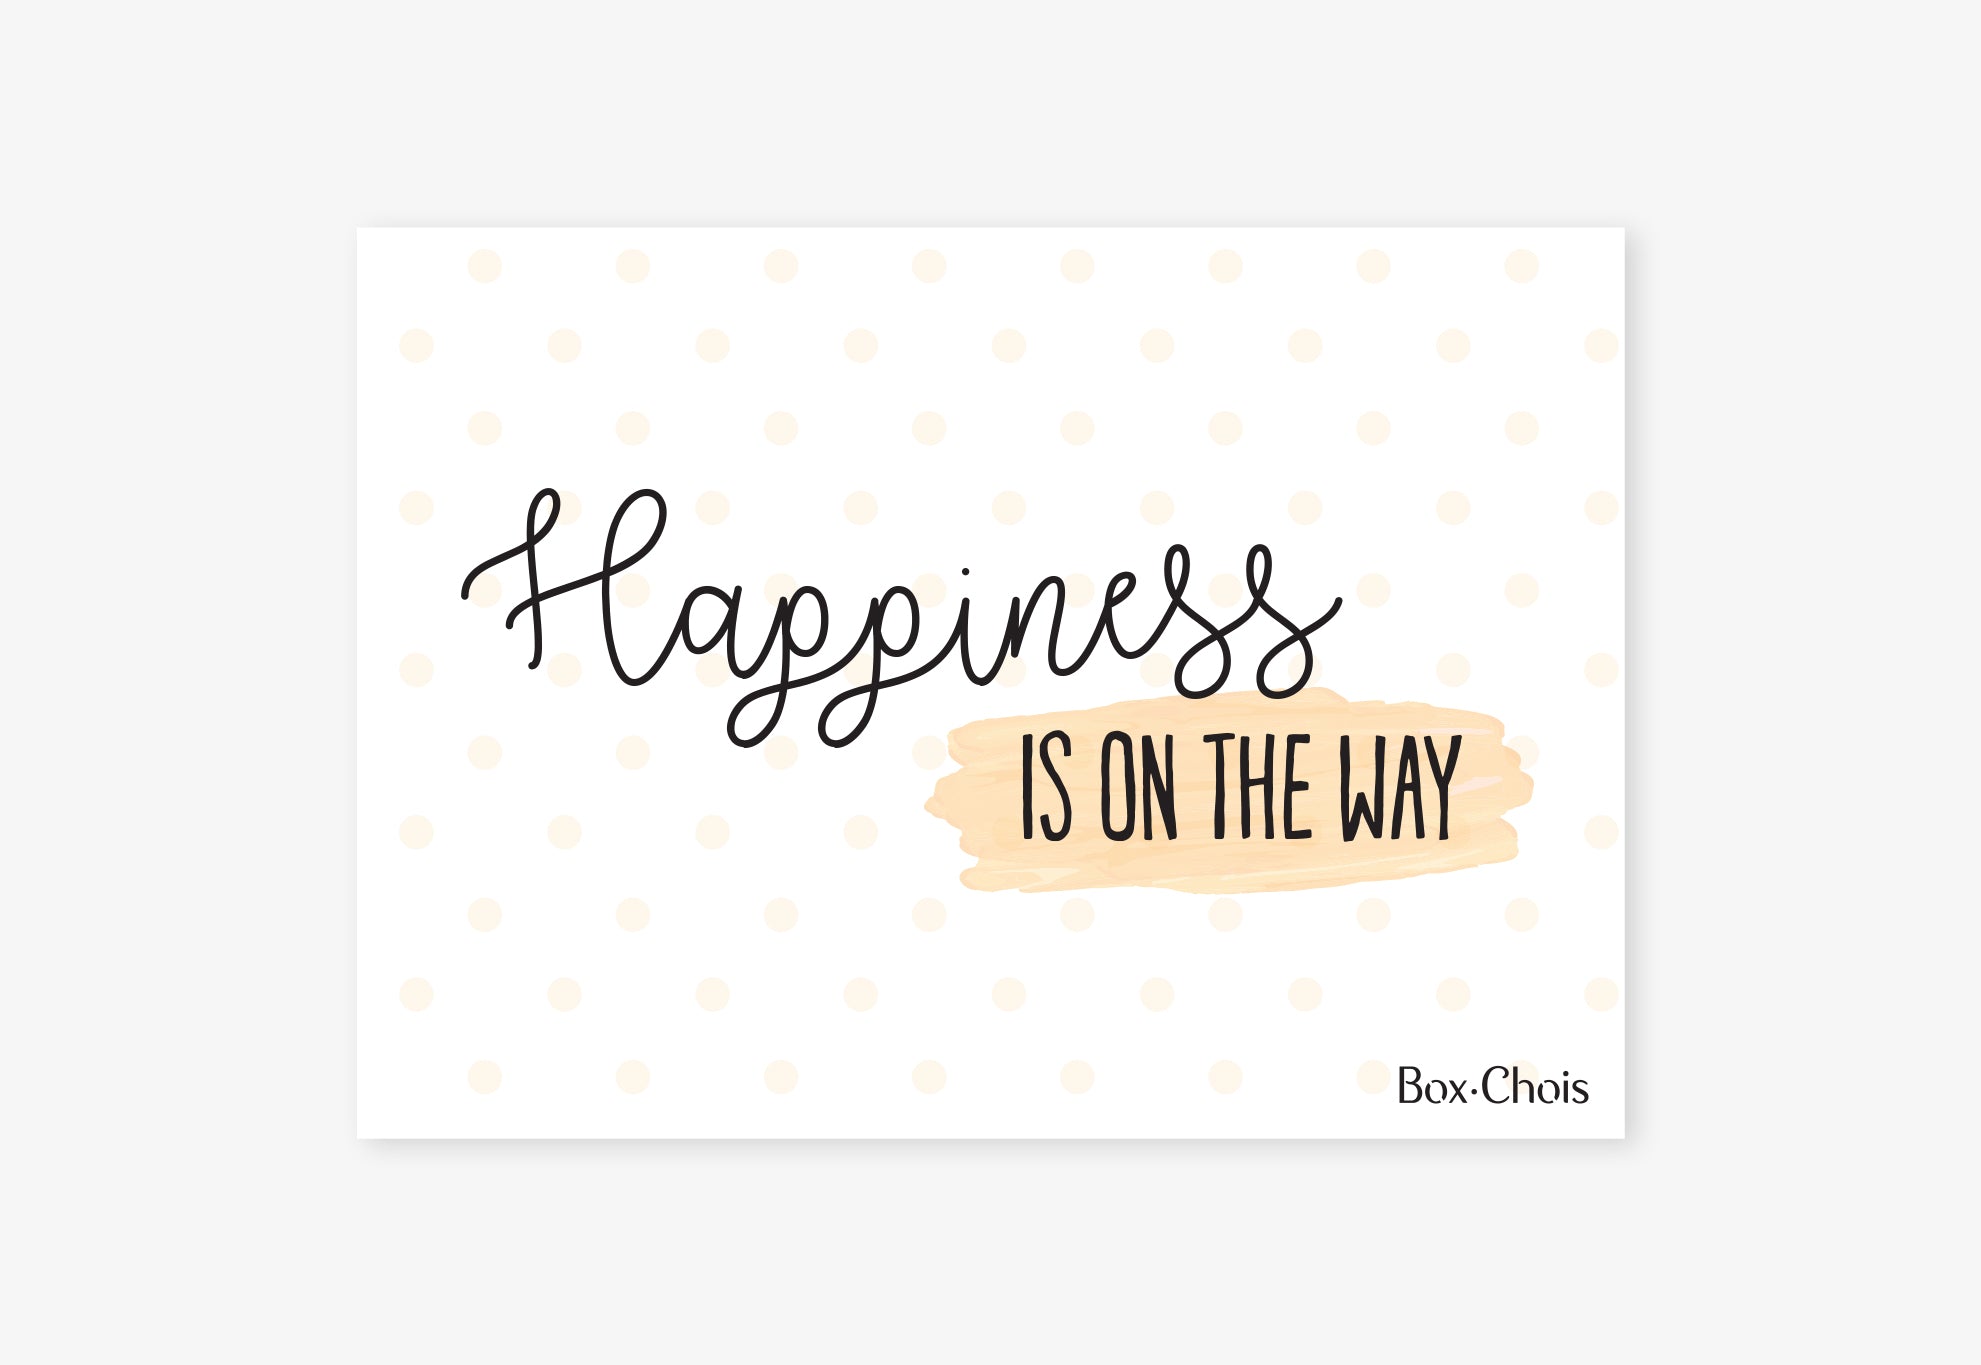 Happiness is on the way